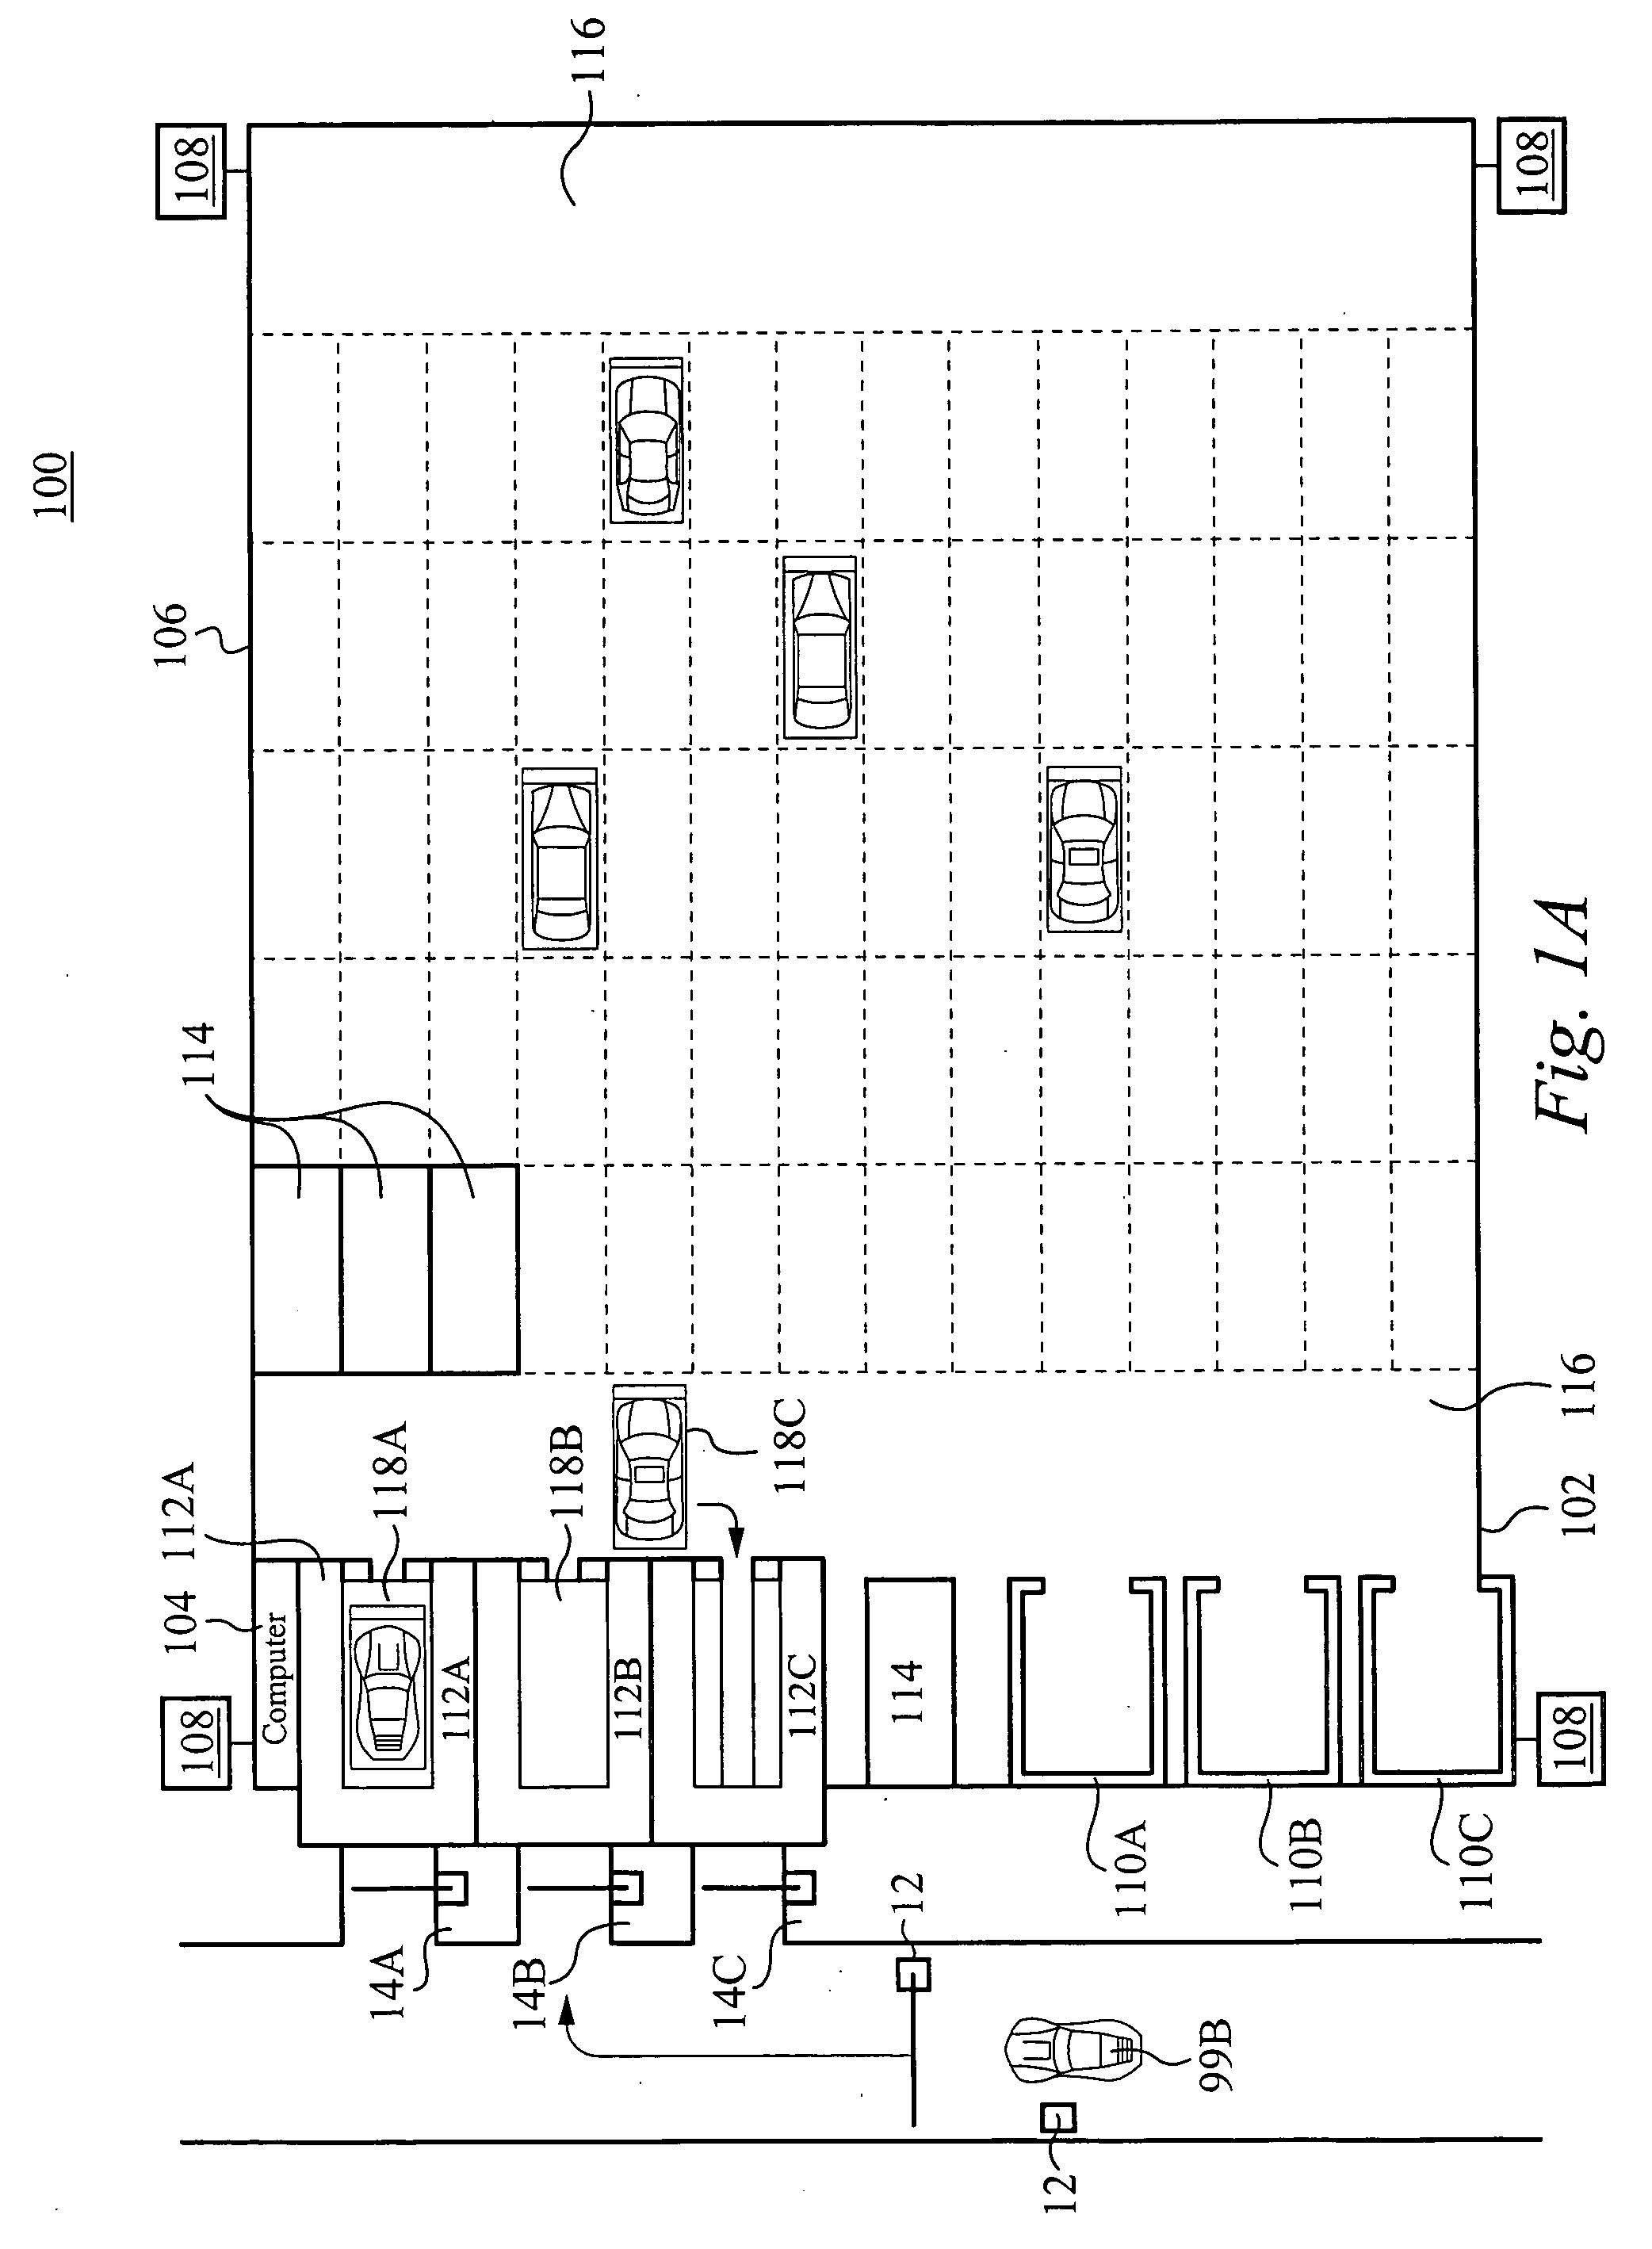 Method and system for automatically parking vehicles